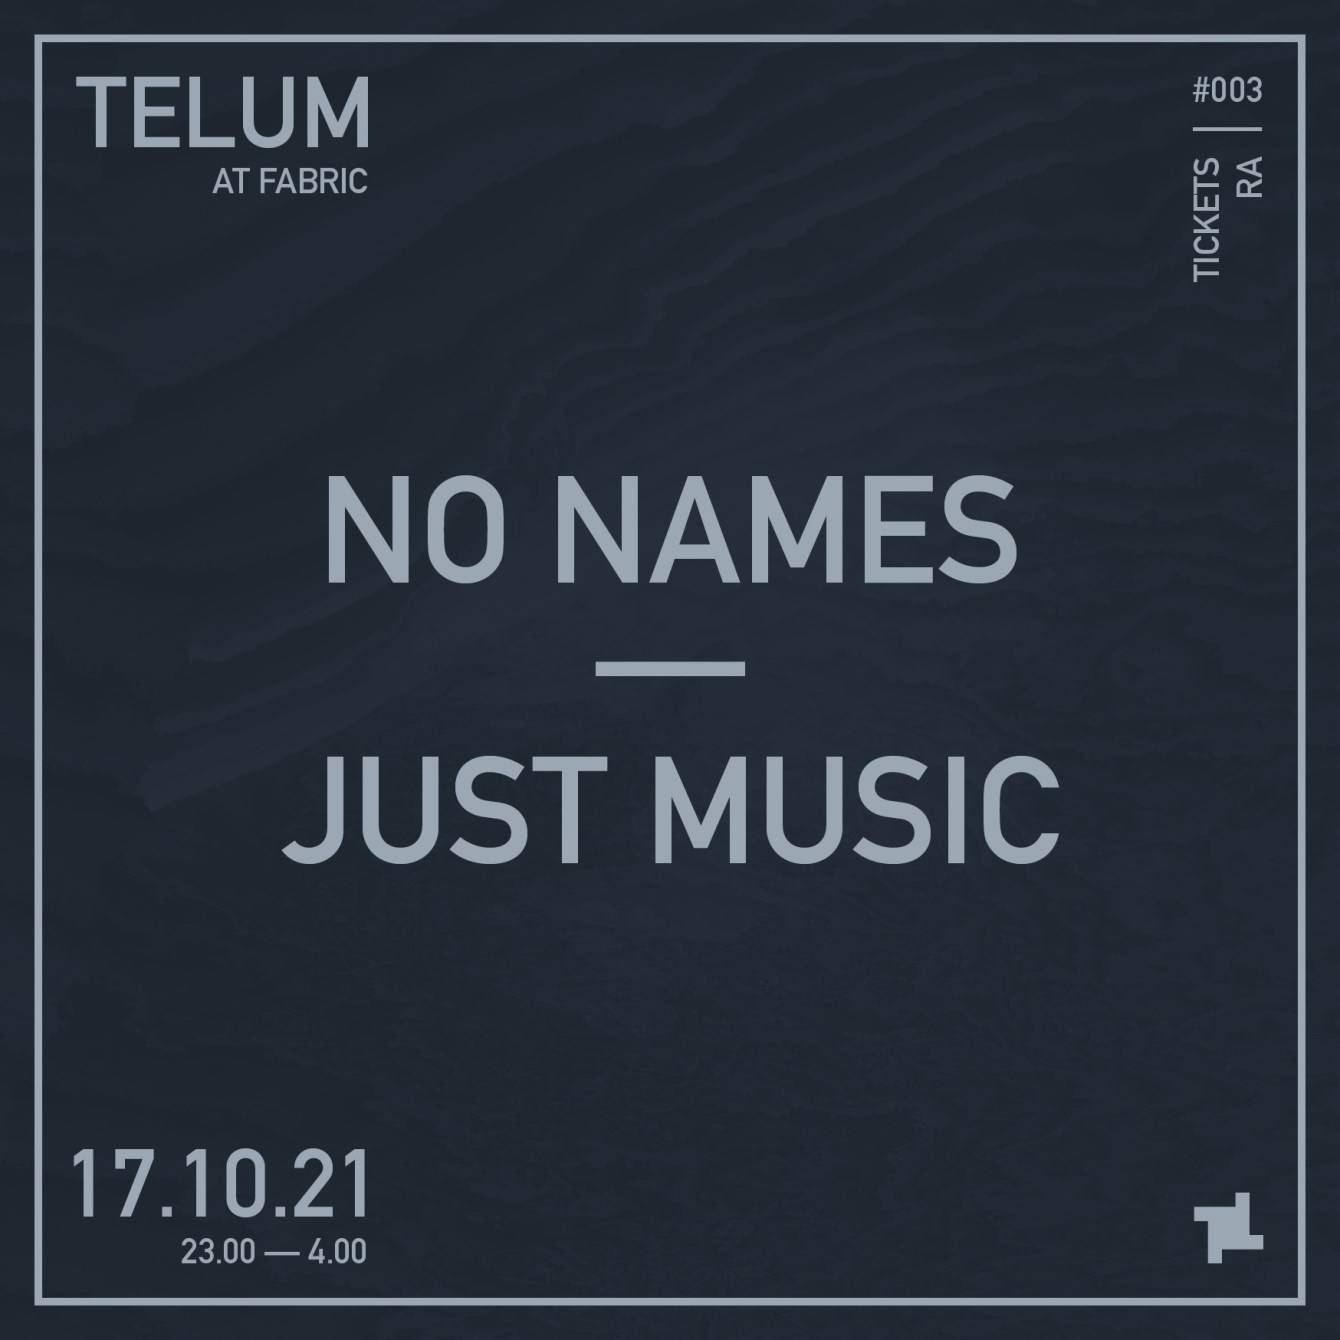 TELUM will be back at fabric in October